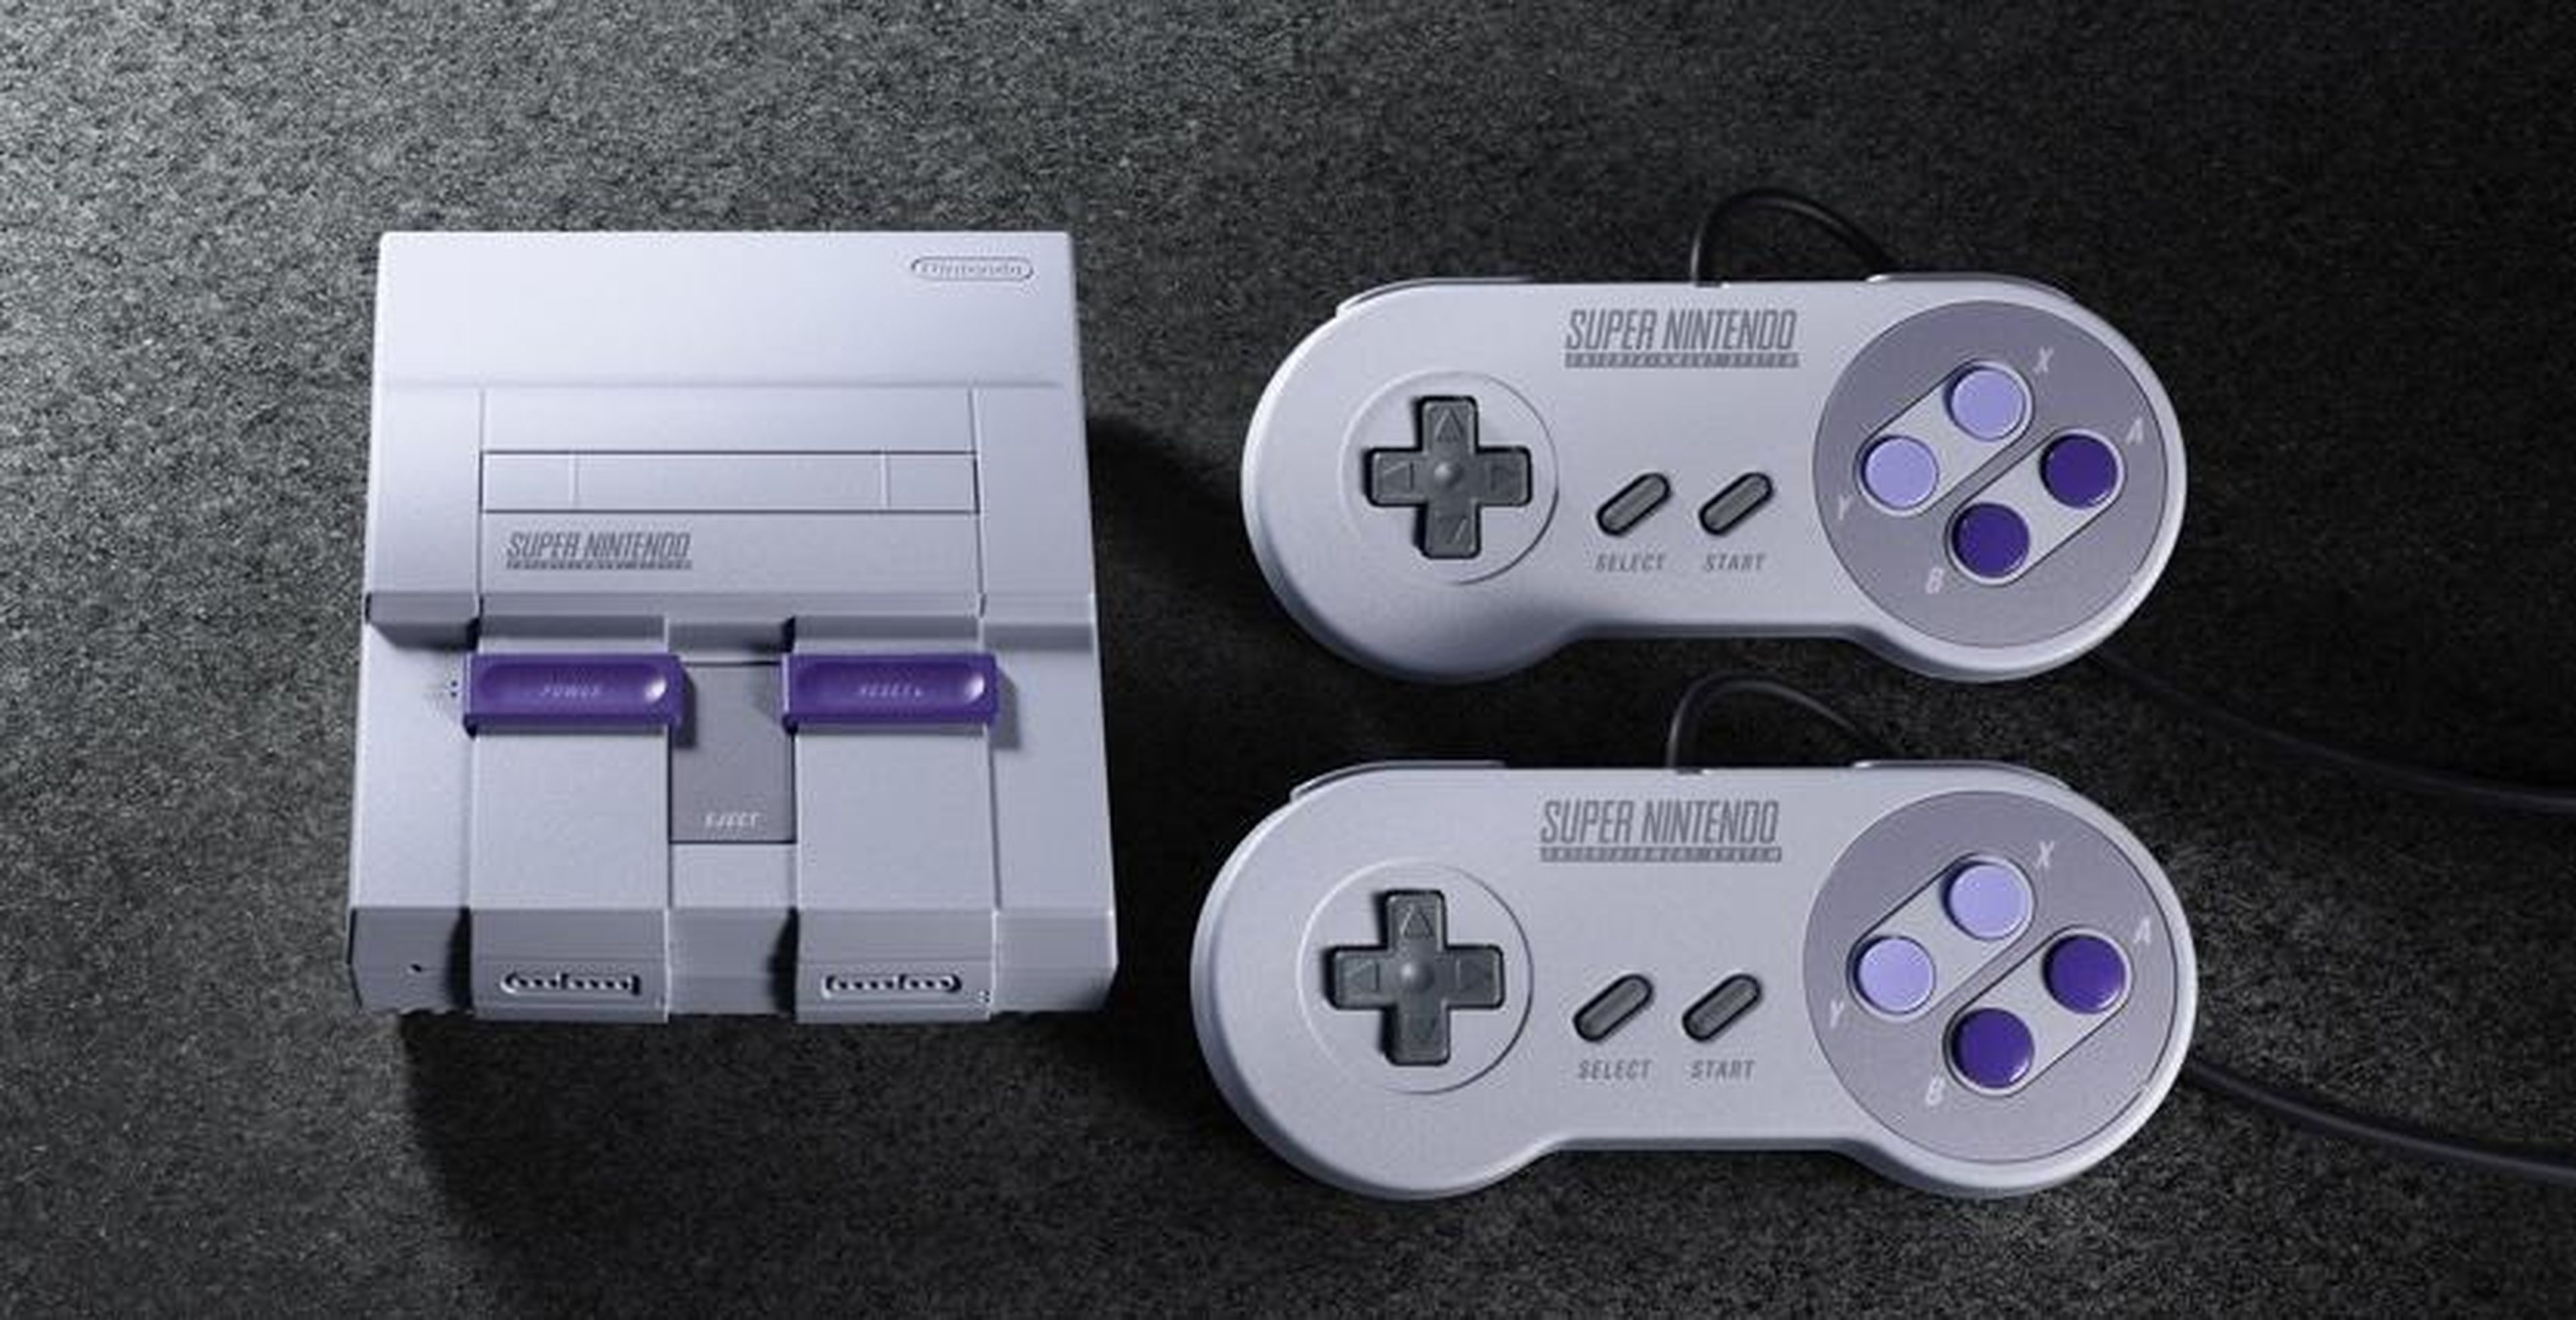 At $80, the Super NES Classic Edition is a slightly pricier retro console — but it's still far less expensive than a brand new Nintendo Switch!